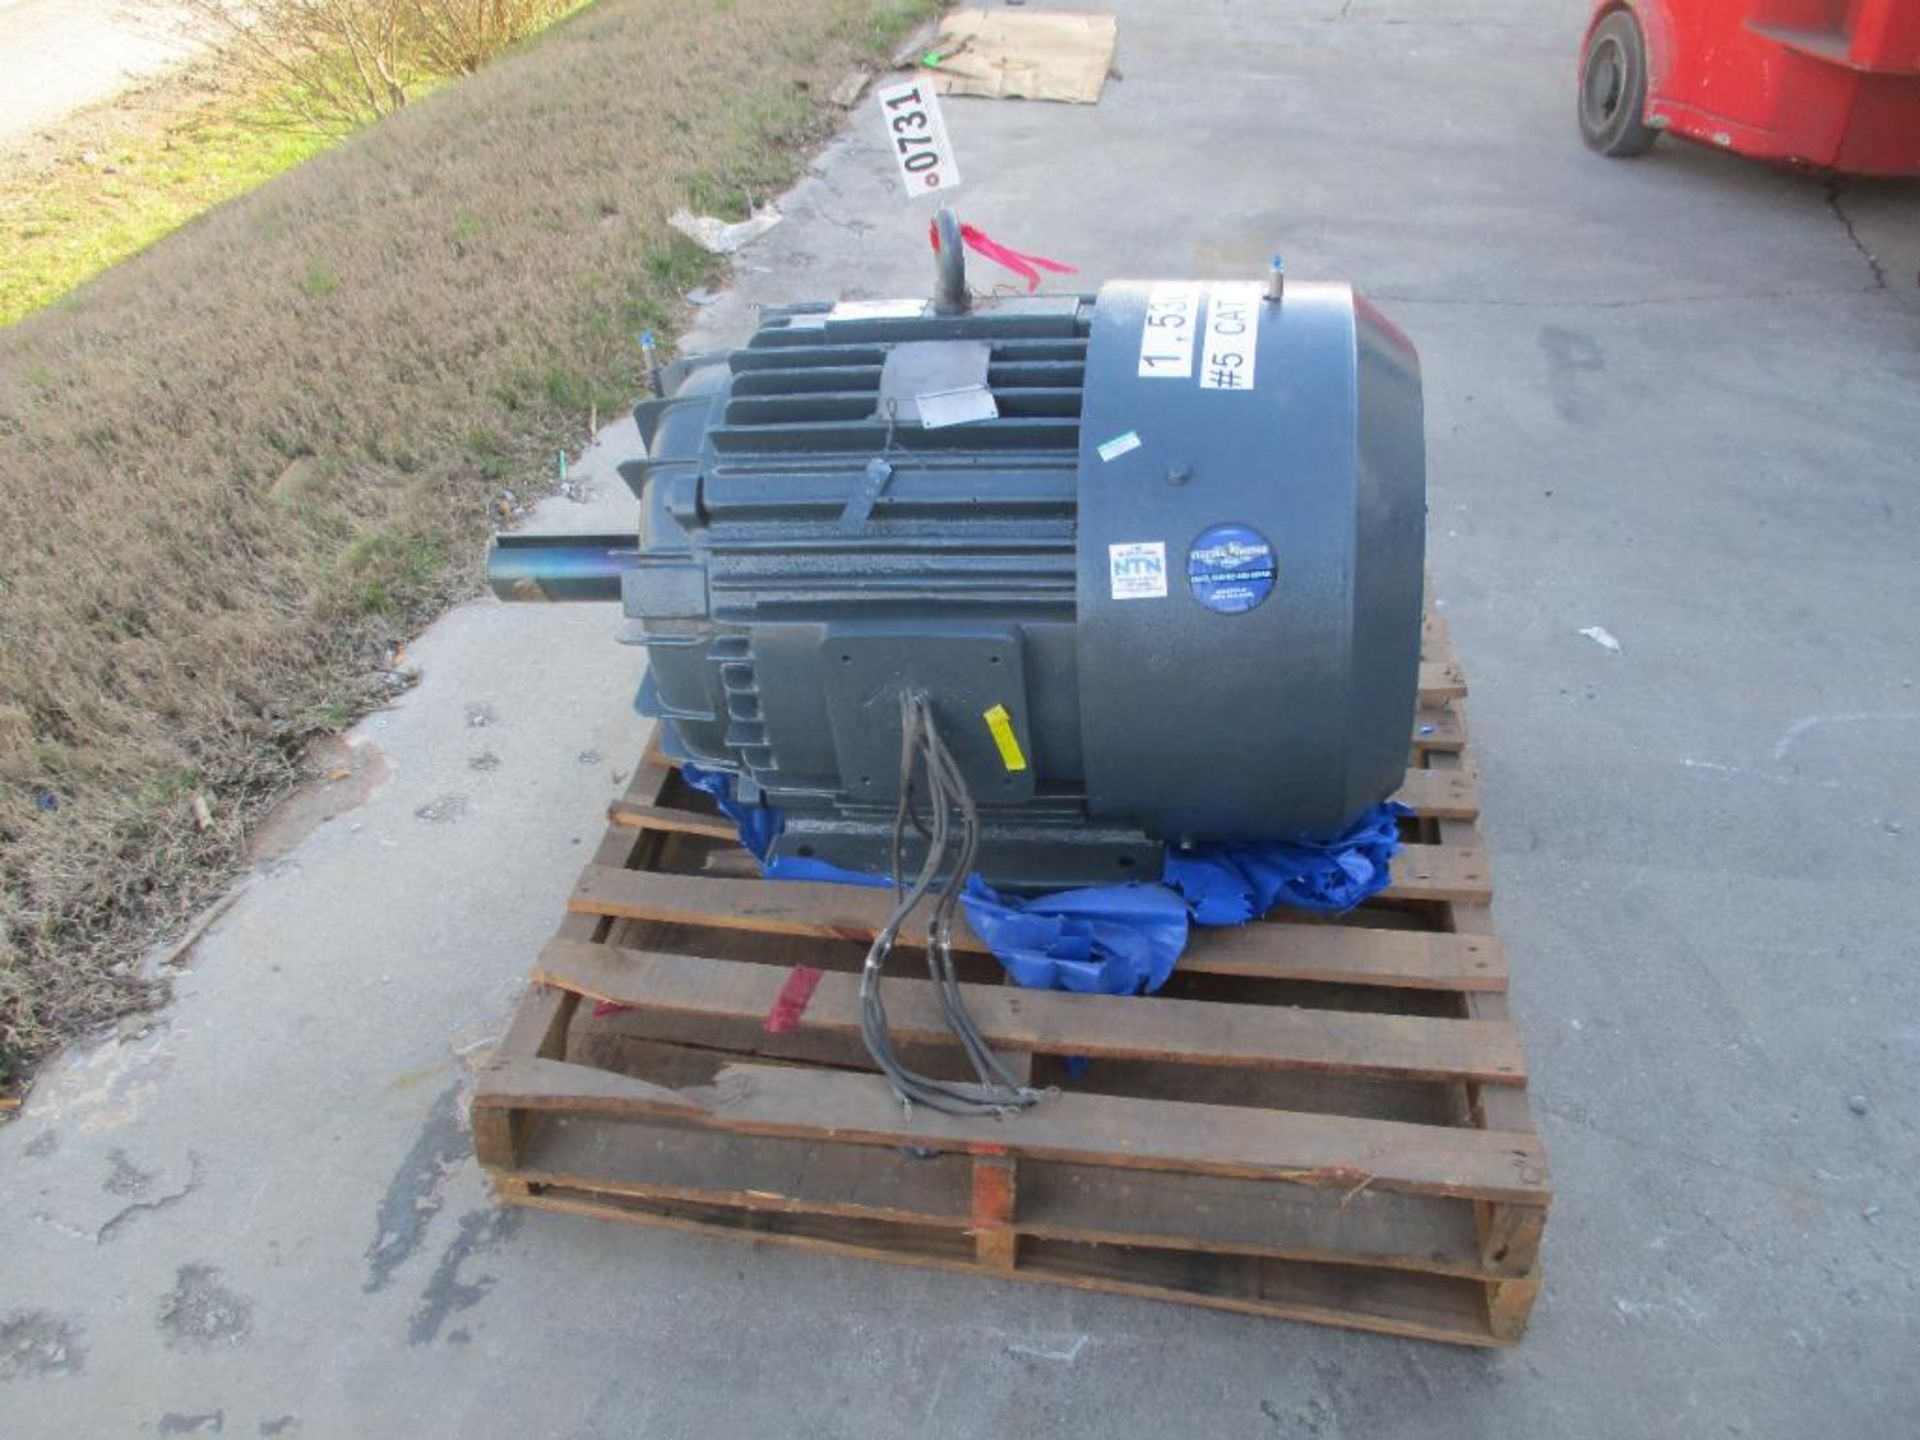 MAGNETEK 3 PHASE 125HP 1770RPM 444T FRAME A/C MOTOR P/N N/A 1622# LBS (THIS LOT IS FOB KNOXVILLE TN)